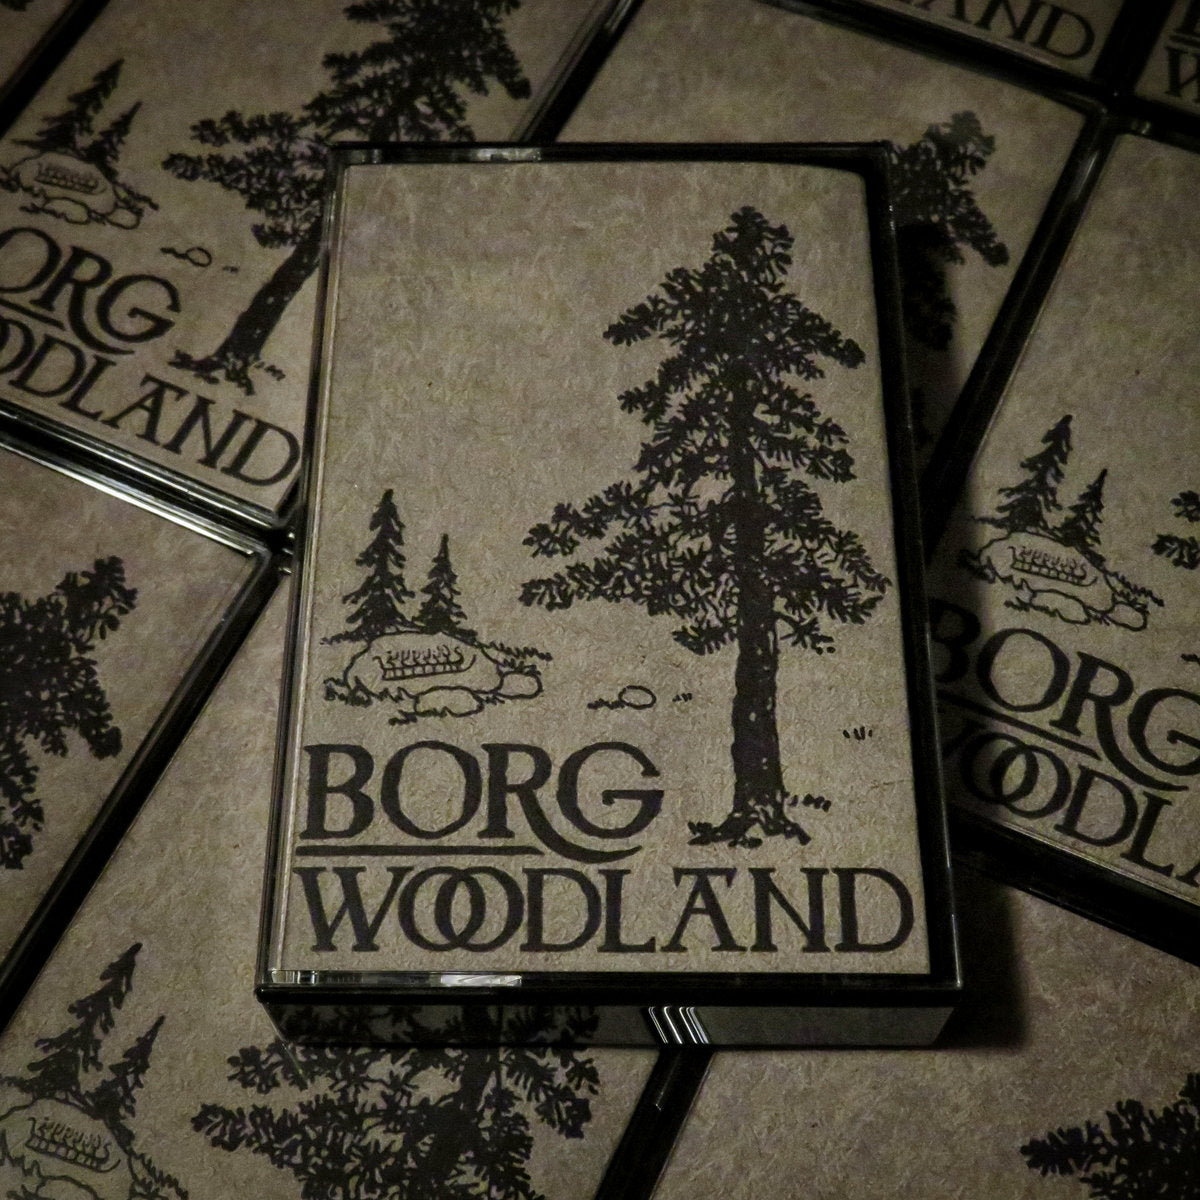 [SOLD OUT] BORG "Woodland" Cassette Tape